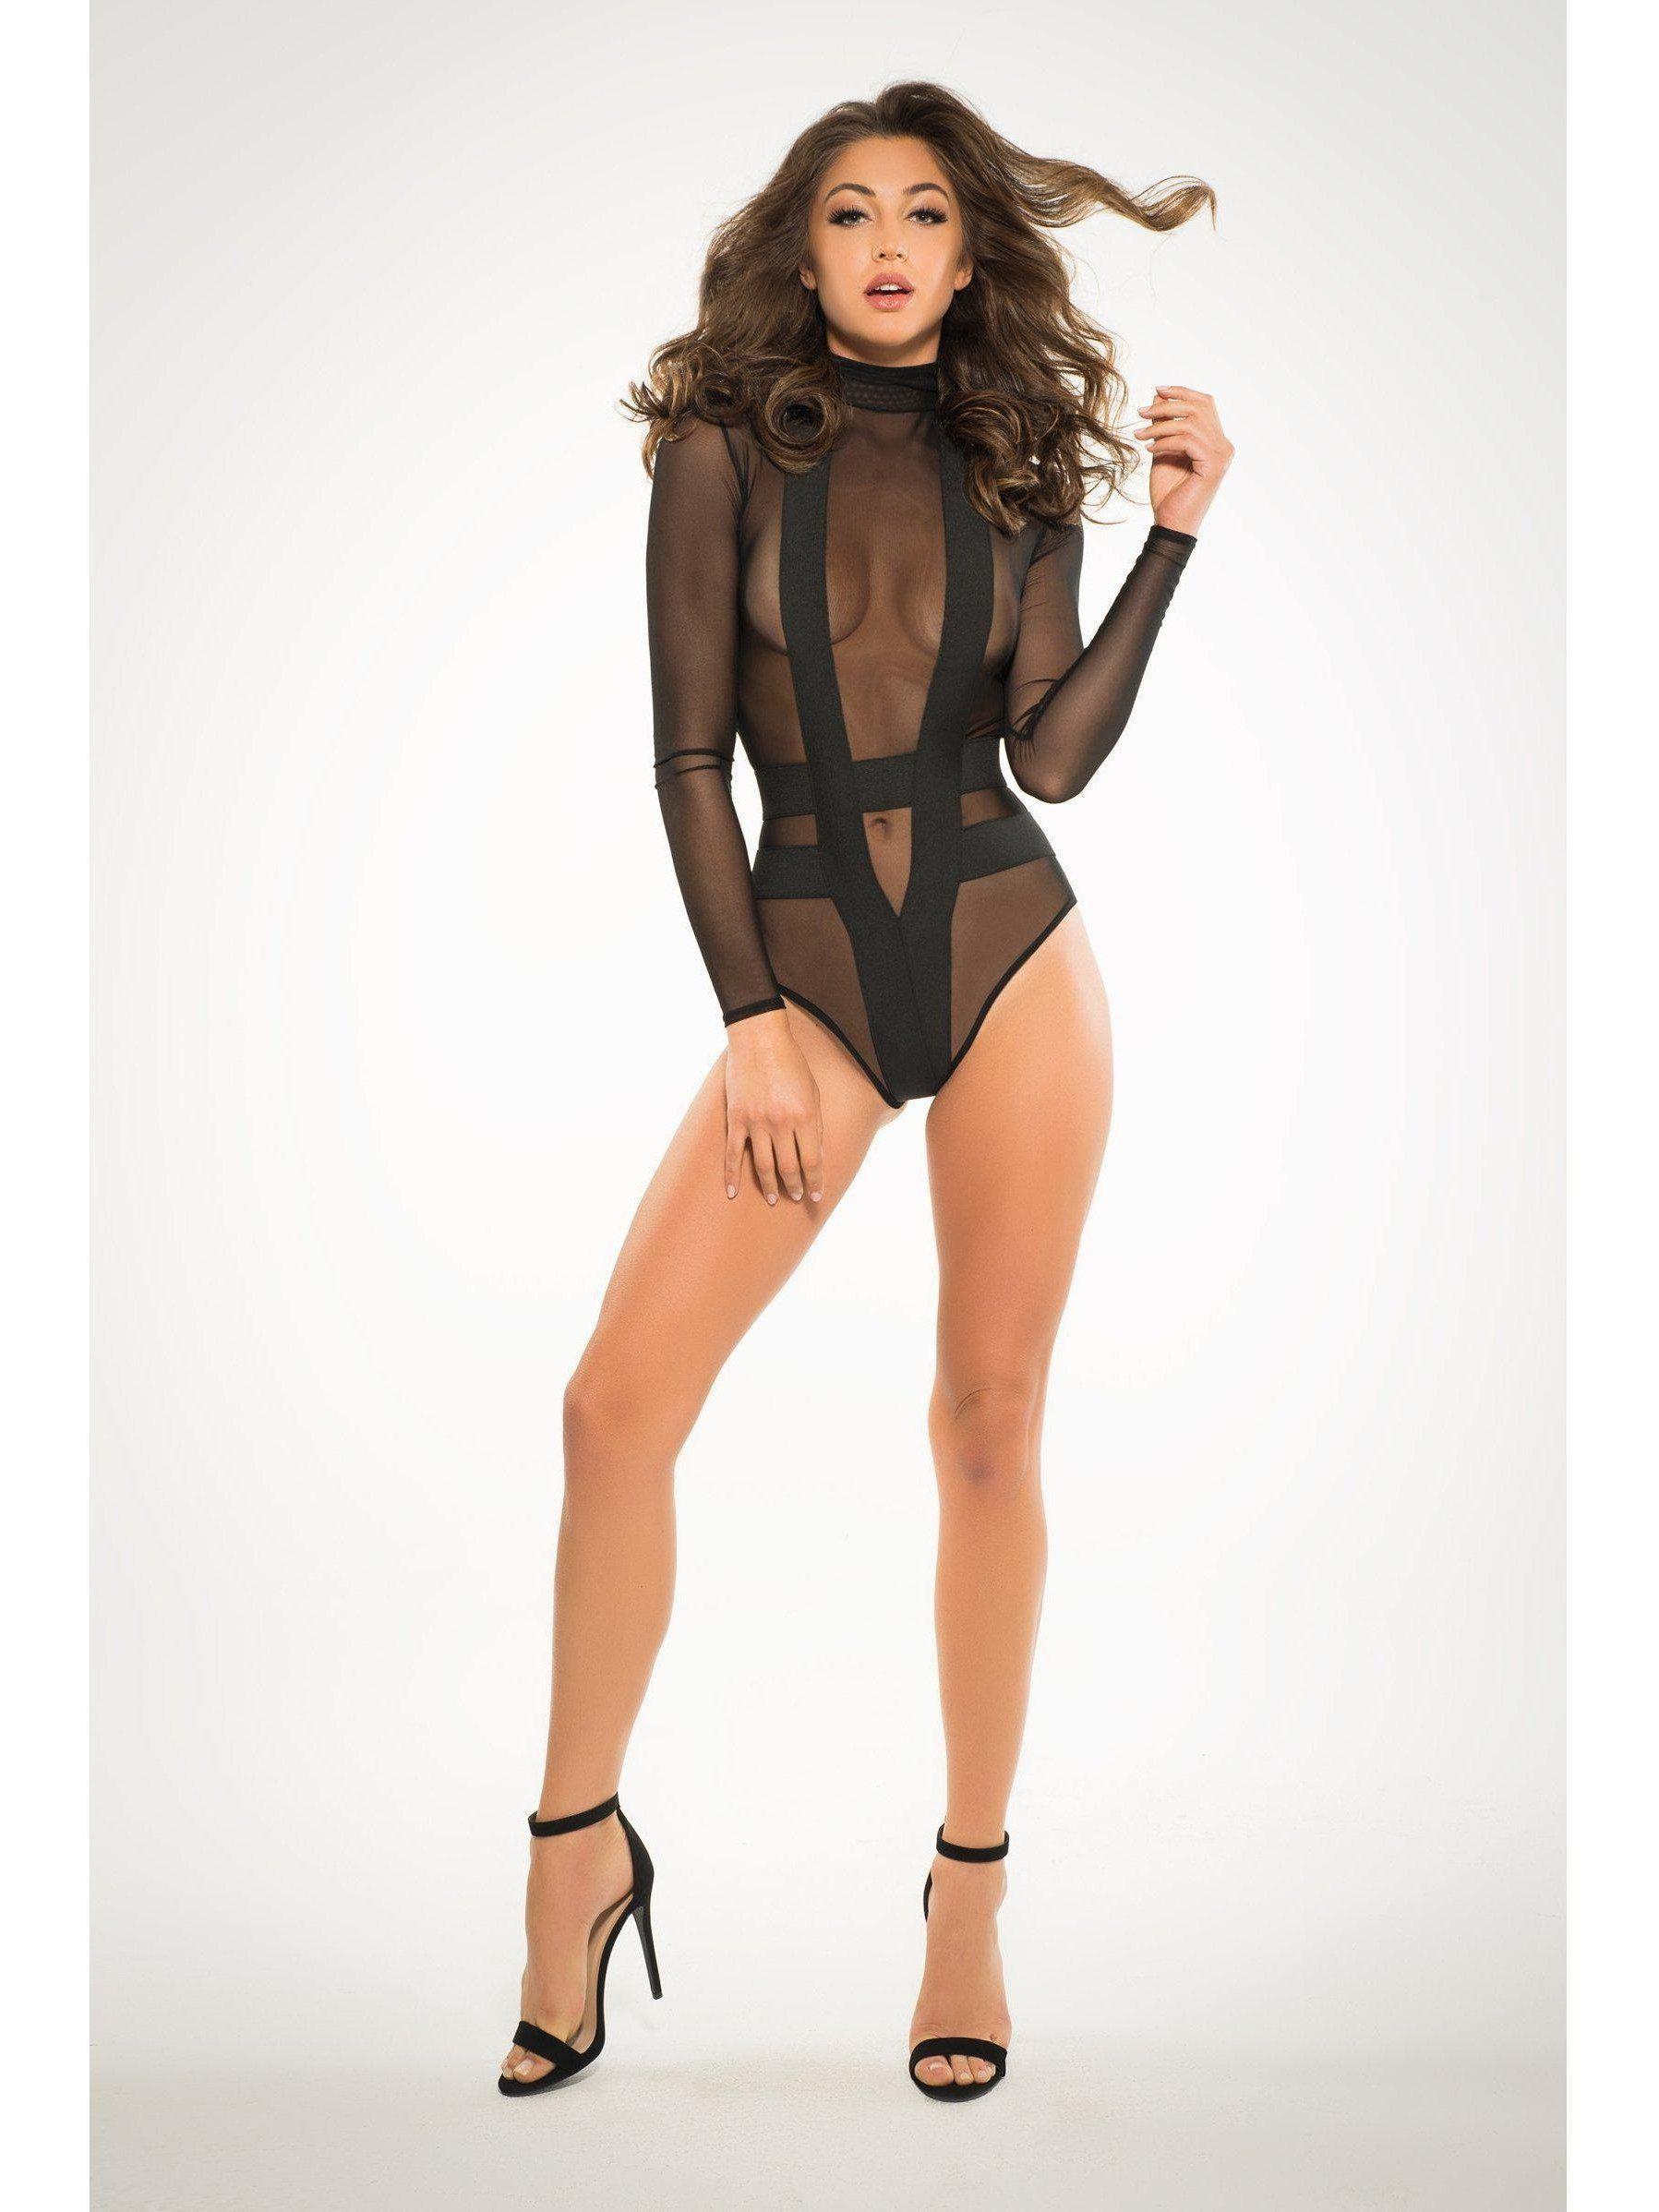 https://satin-boutique.com/cdn/shop/products/Adore-A1017-Women-s-Seductively-Sheer-and-Cheeky-Bodysuit-Allure-Lingerie-1607677556.jpg?v=1607677557